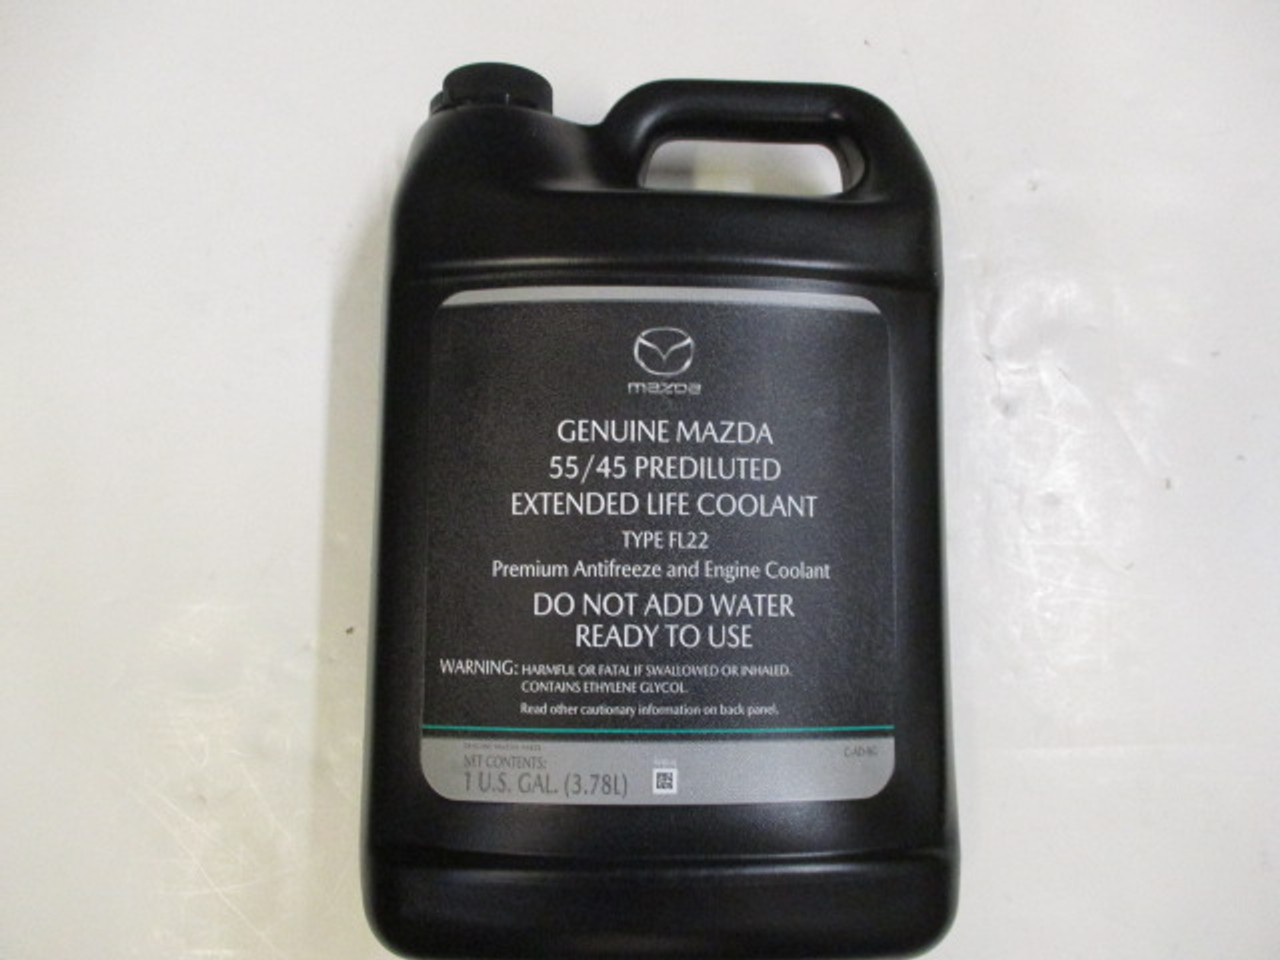 Mazda 55/45 Prediluted Extended Life Coolant Type FL22 - 1 Gallon